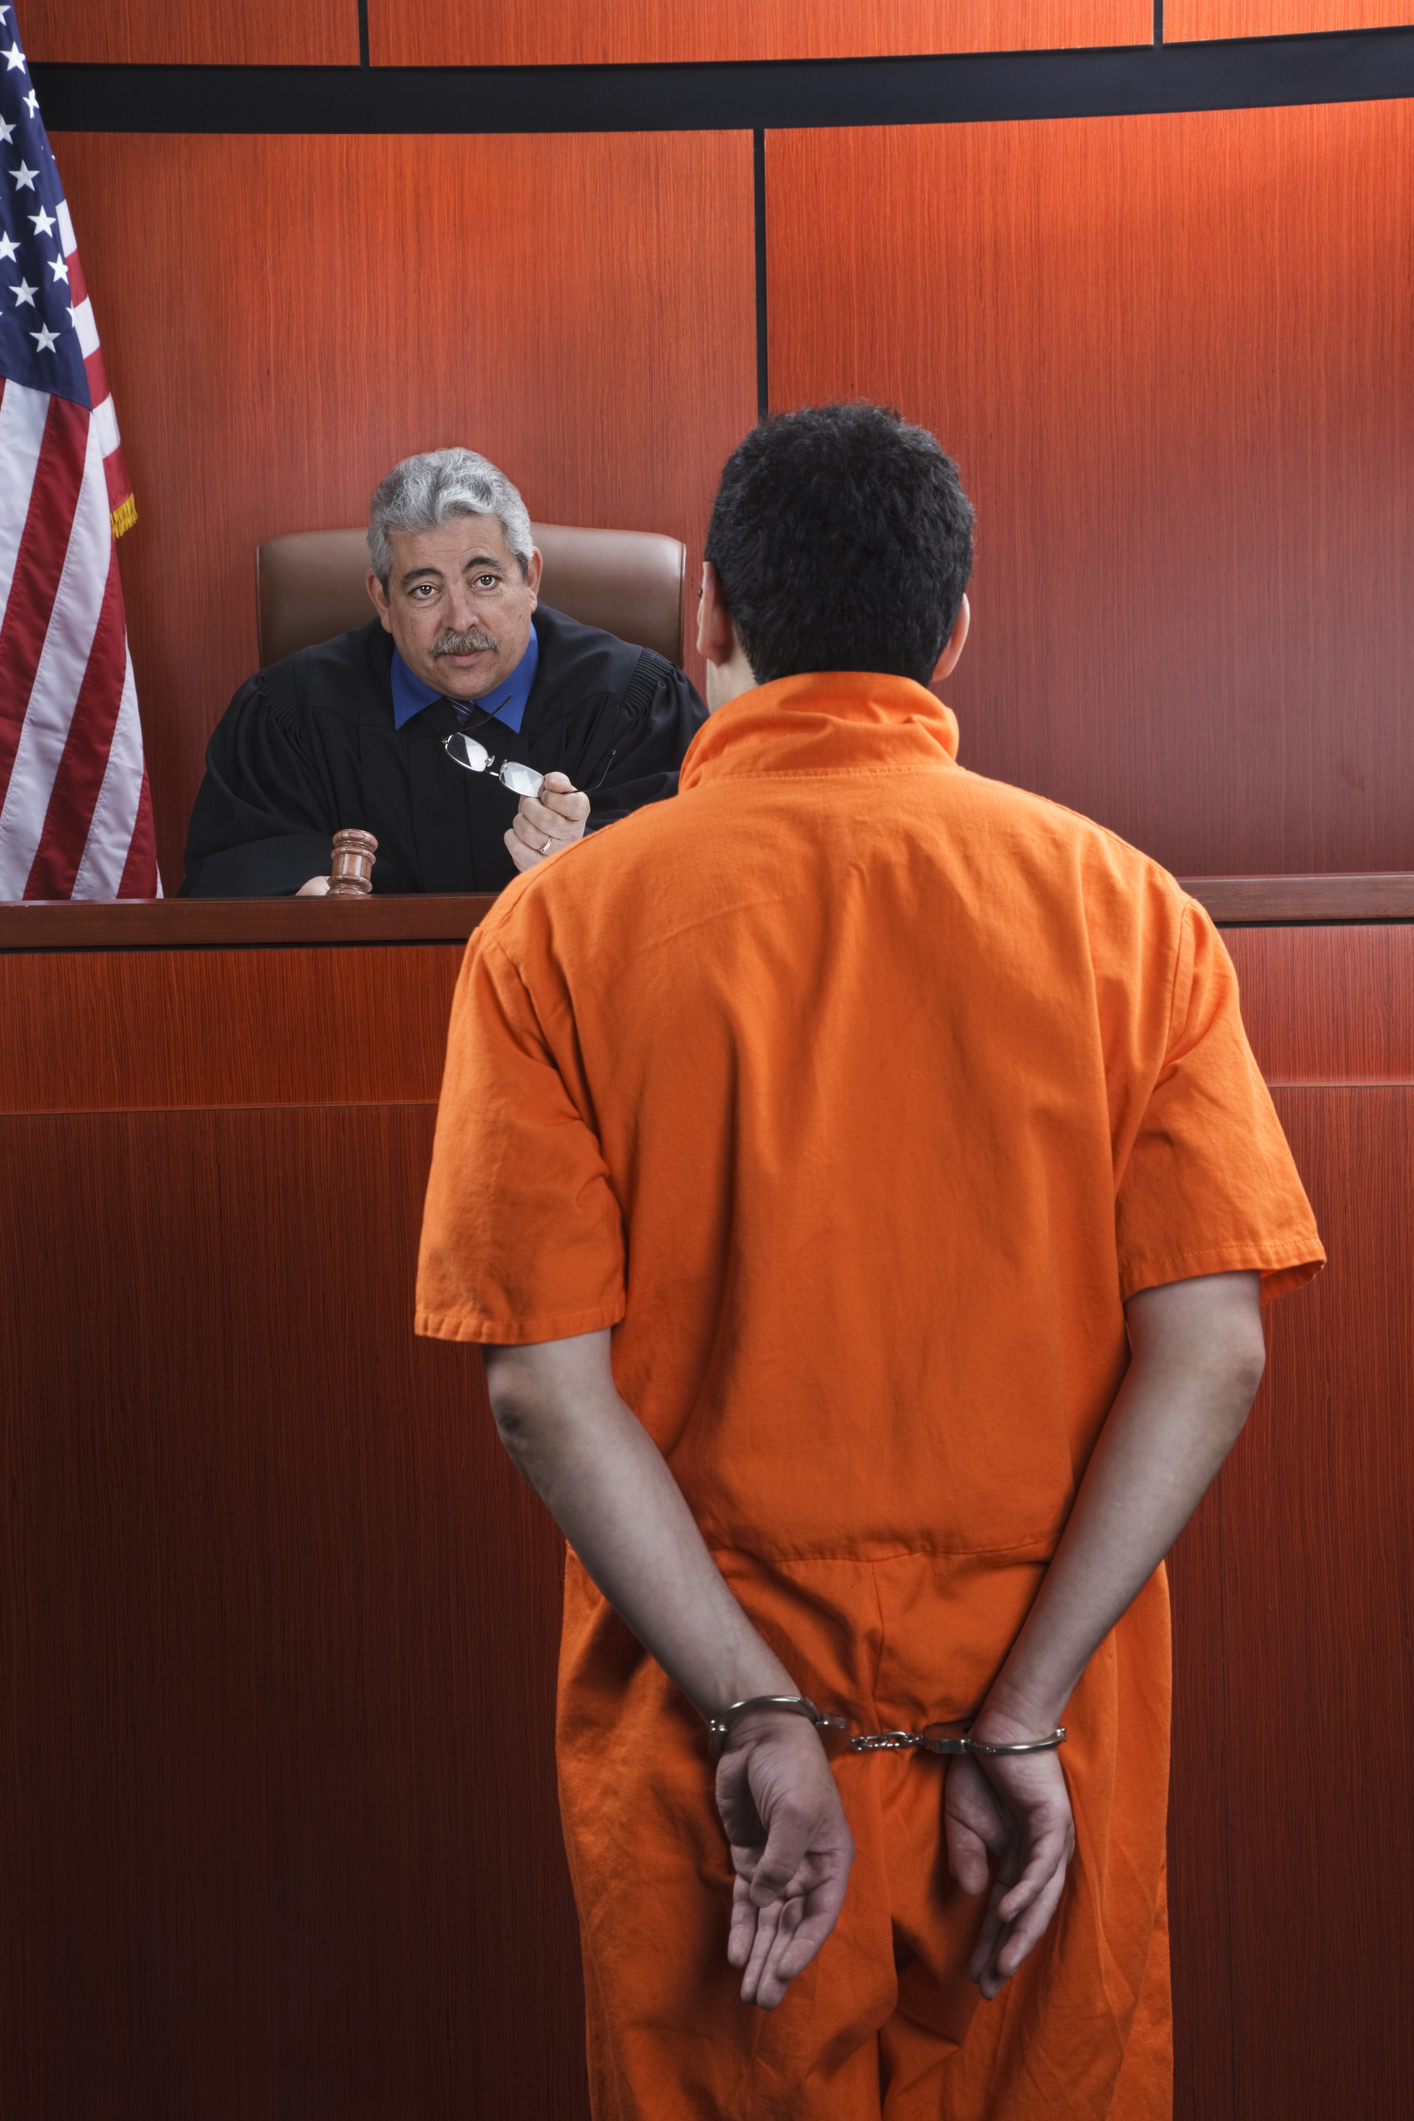 A handcuffed man in orange standing in a courtroom in front of a judge